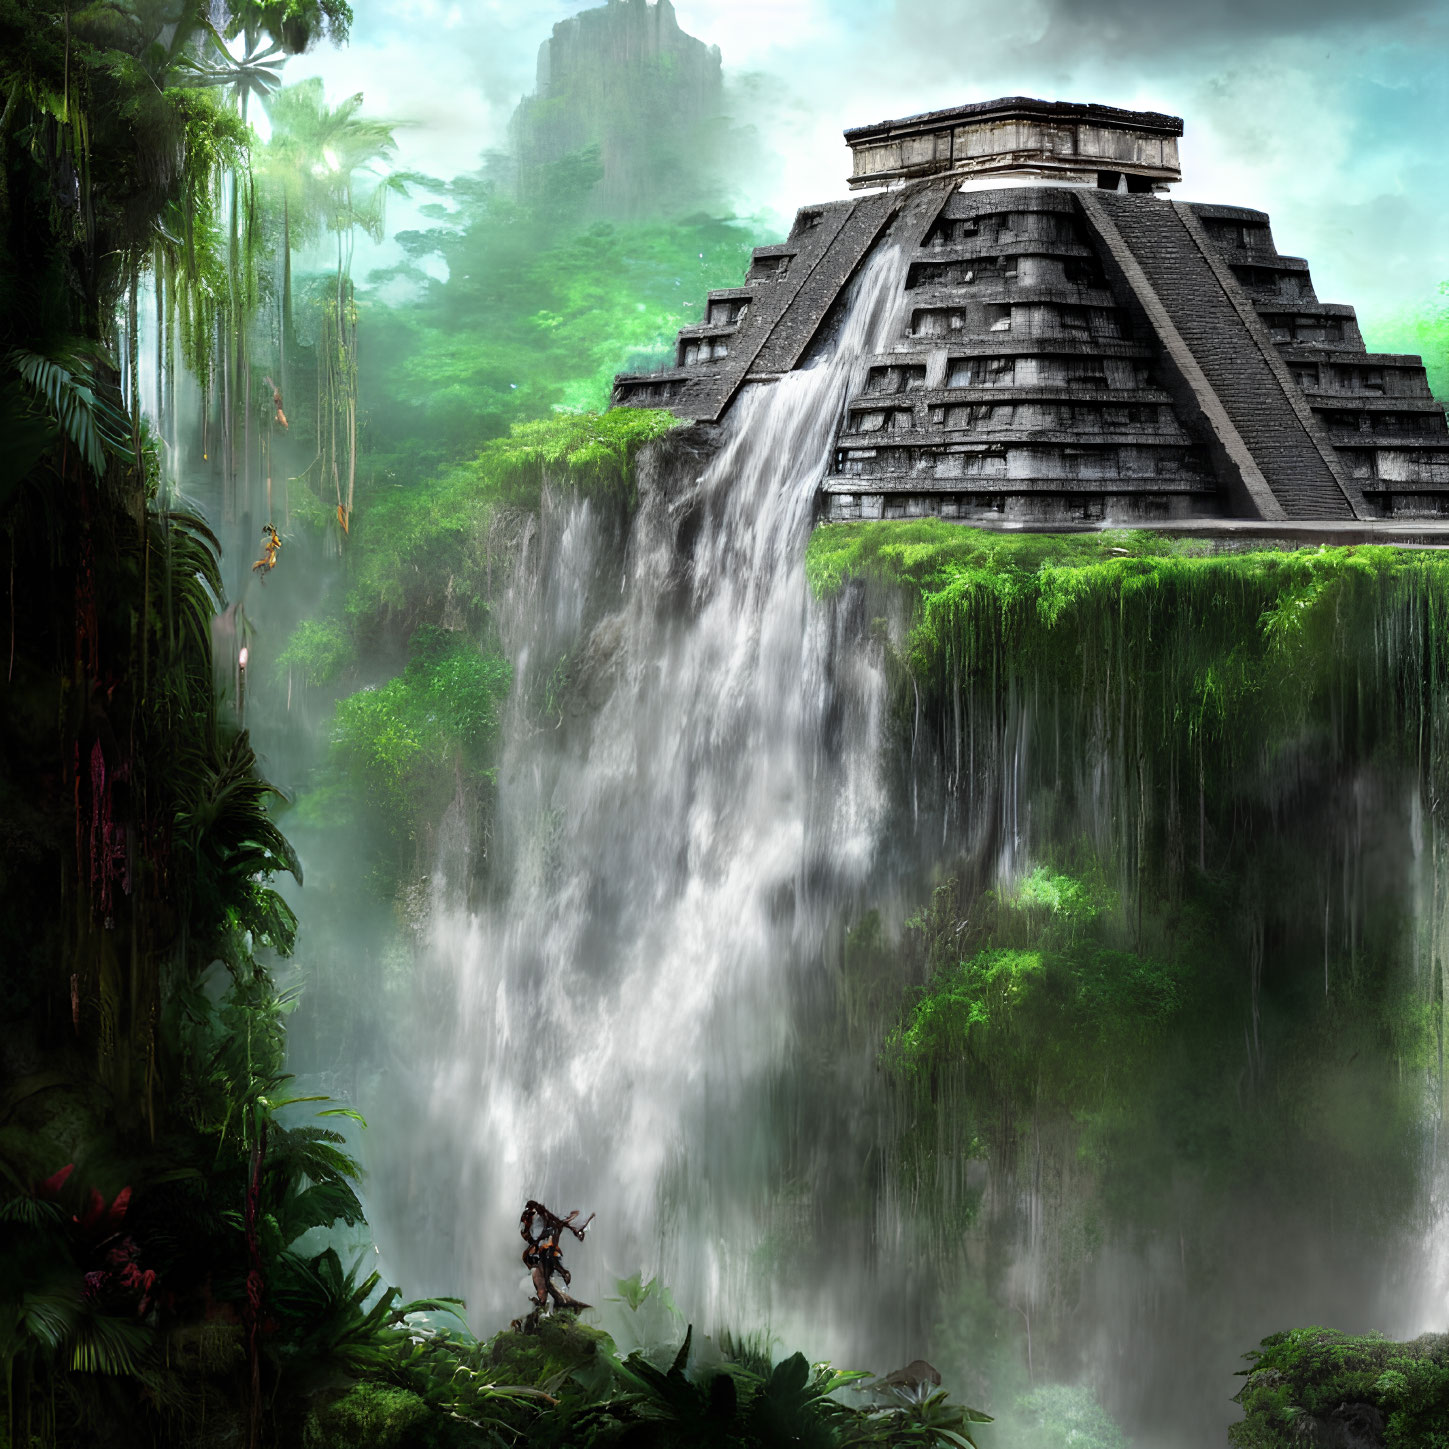 Ancient pyramid near waterfall with lush greenery and lone figure